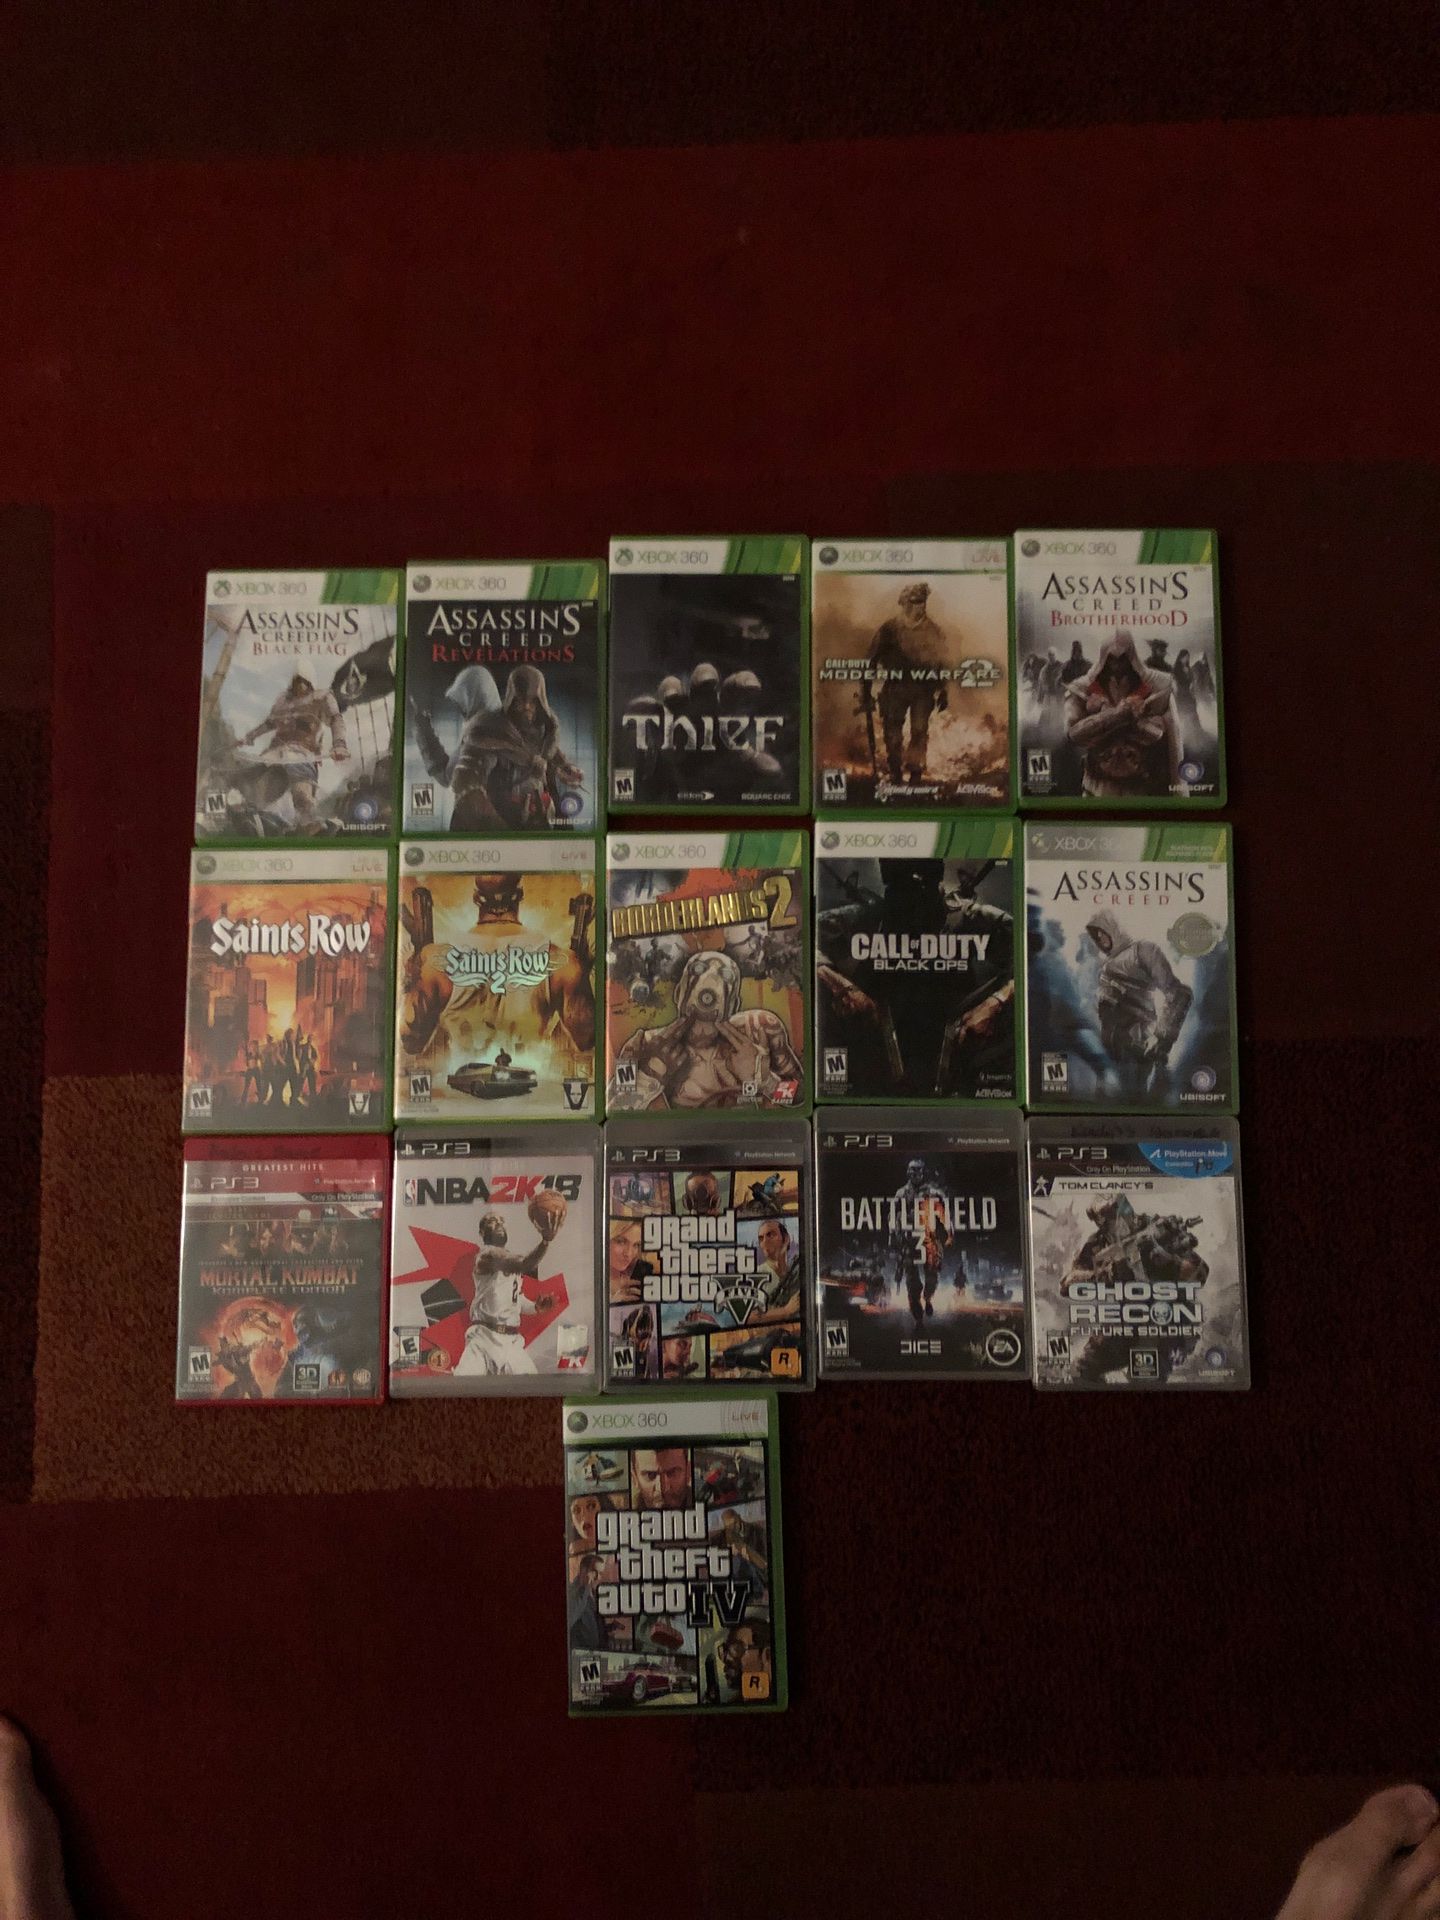 Xbox 360 and PS3 games make me a offer on all or one